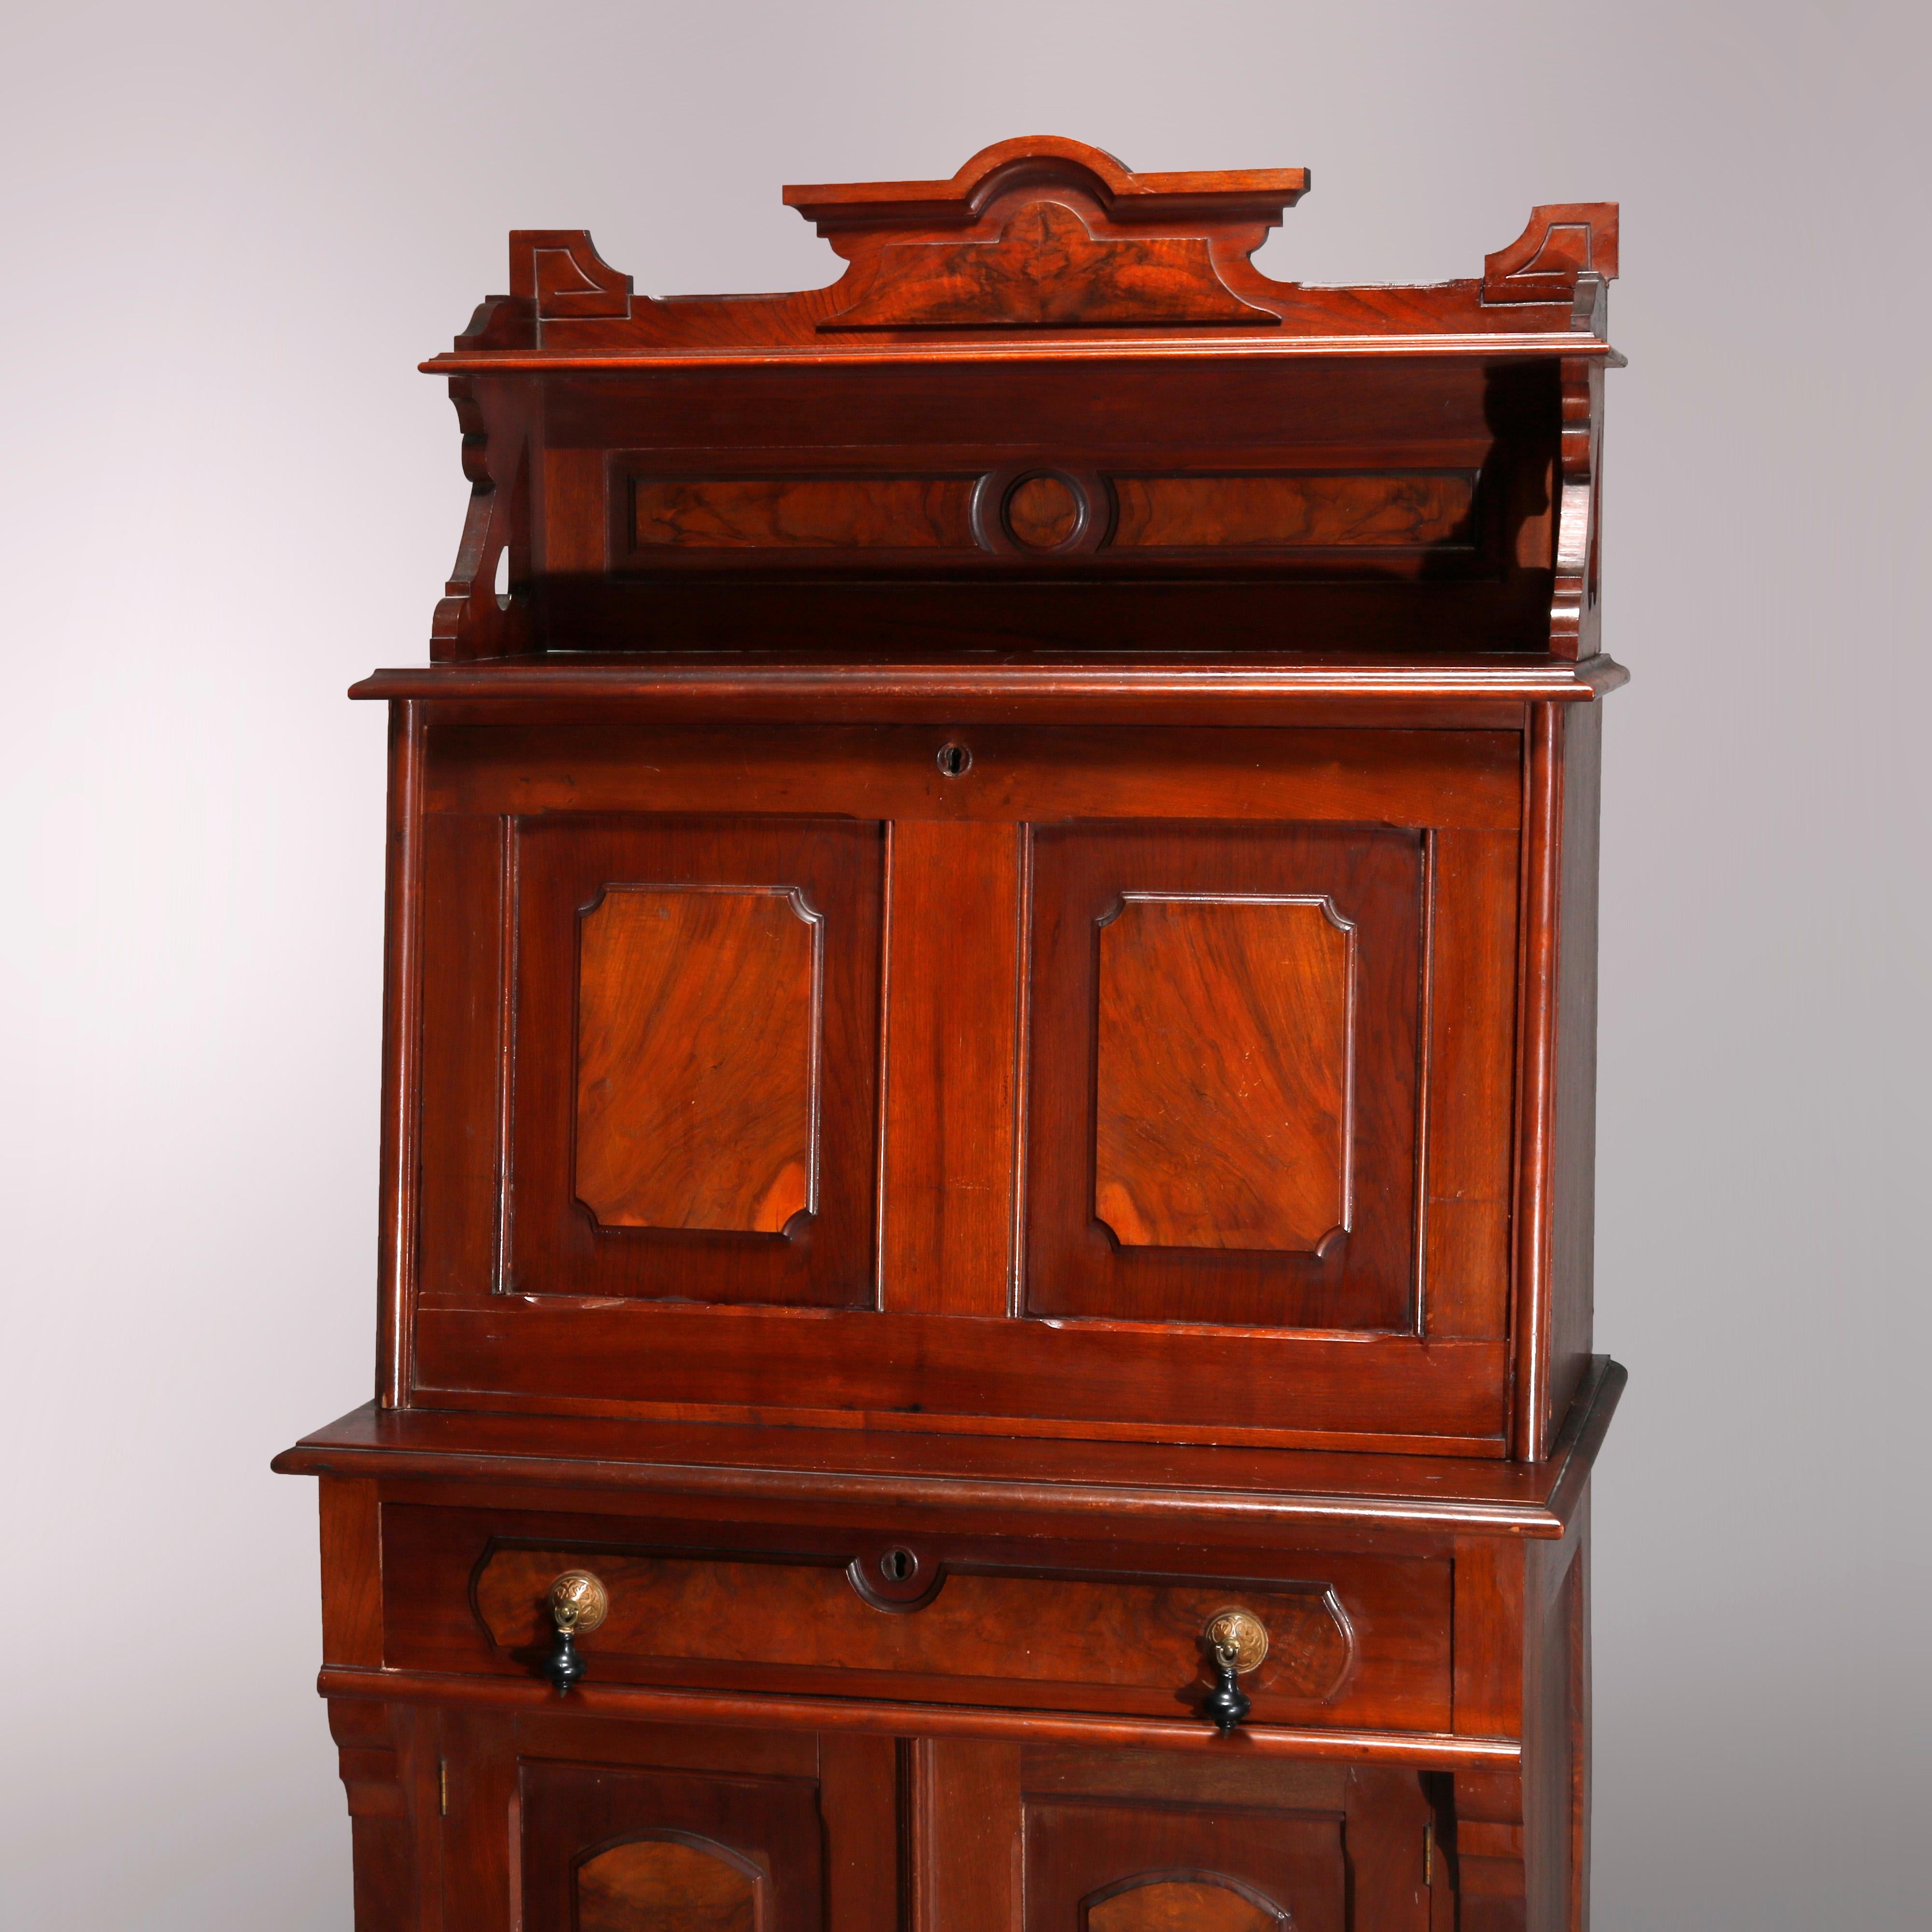 An antique Eastlake secretary offers paneled walnut construction with upper having shaped crest surmounting shelf and slant front opening to writing desk and storage compartments and pigeon holes, lower with single long drawer over double door